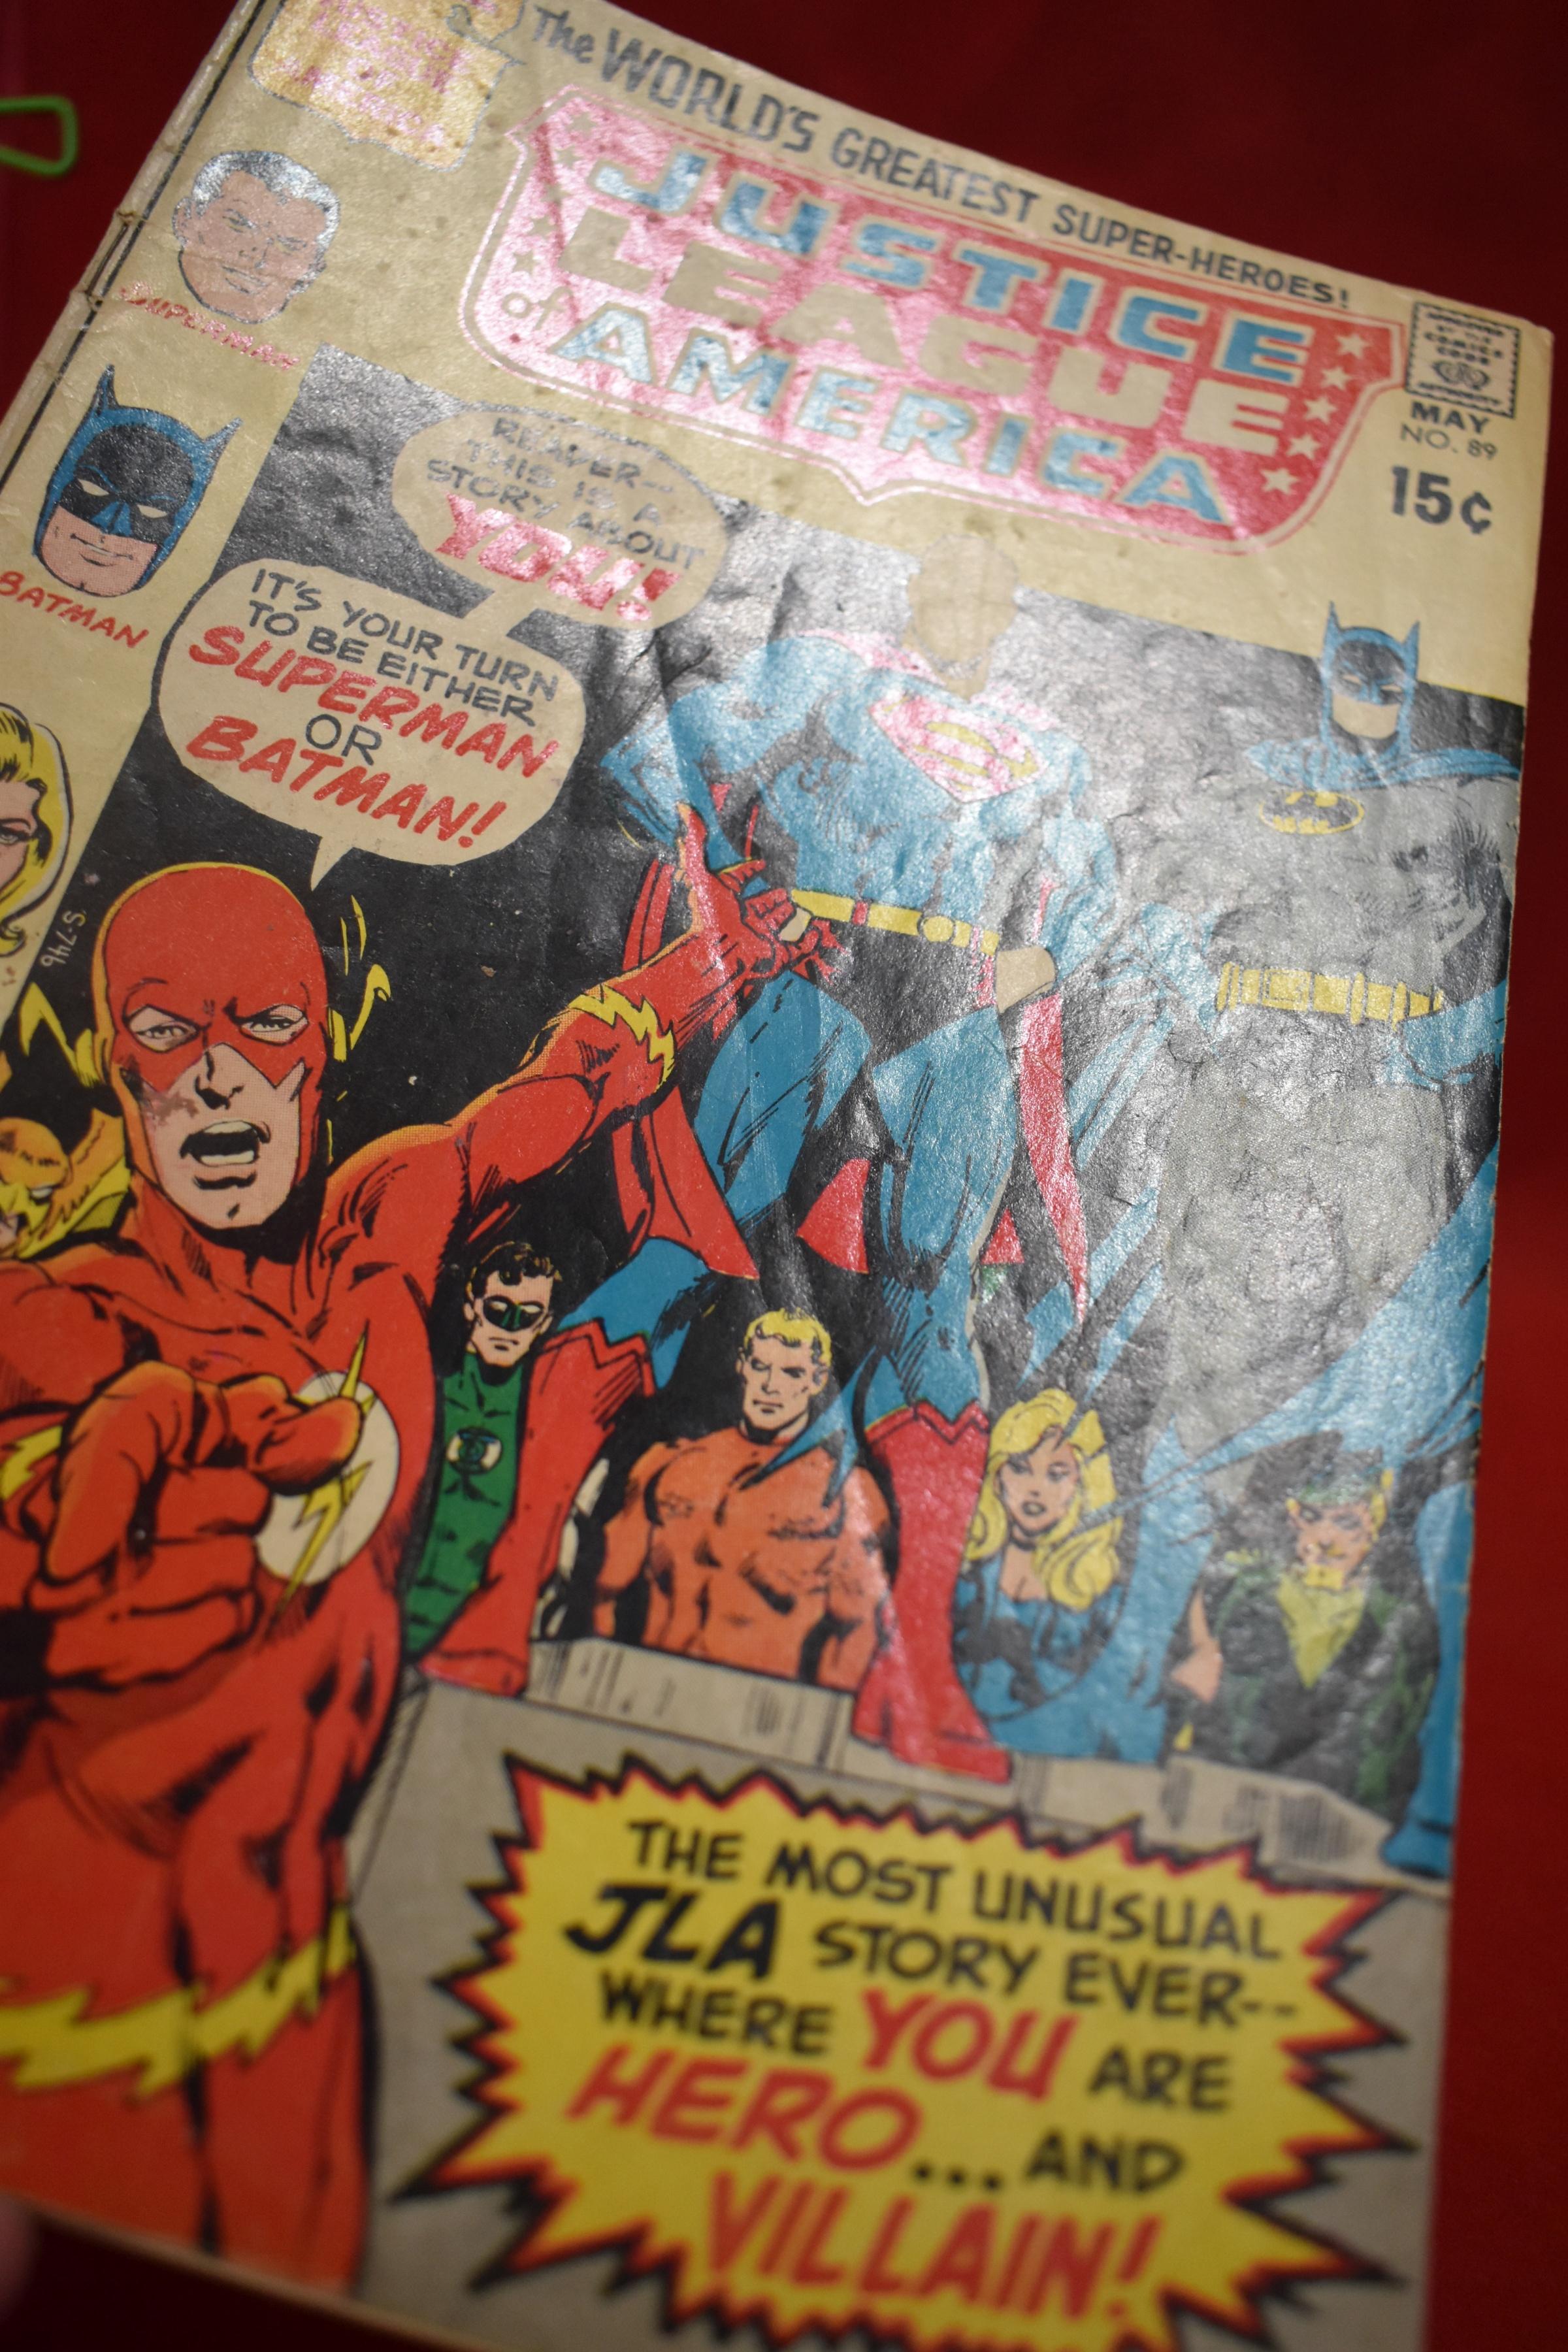 JUSTICE LEAGUE #89 | MOST DANGEROUS DREAMS OF ALL - CLASSIC NEAL ADAMS | SOLID - CREASING - SEE PICS